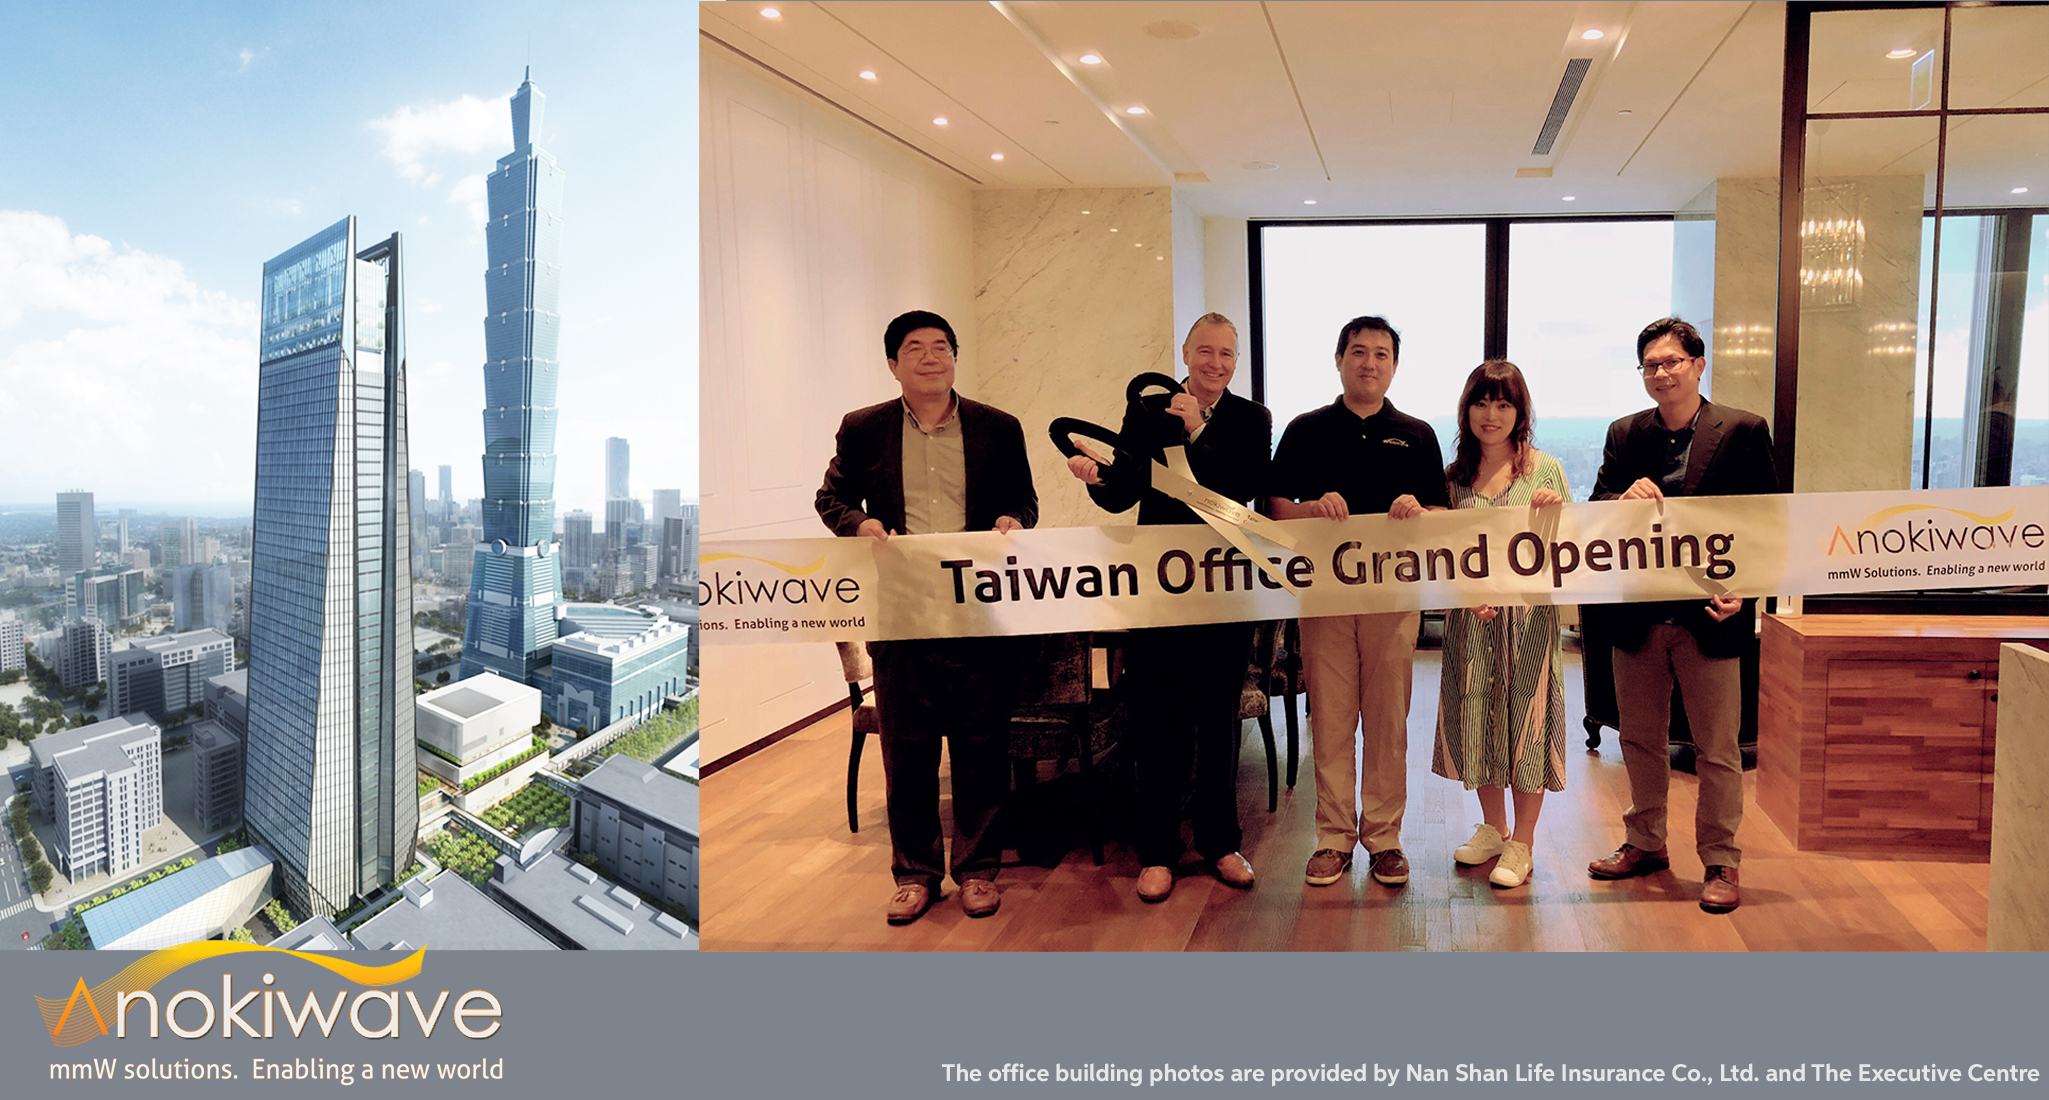 The Anokiwave A/P team celebrate the opening of the new Taiwan Office in Taipei, Taiwan